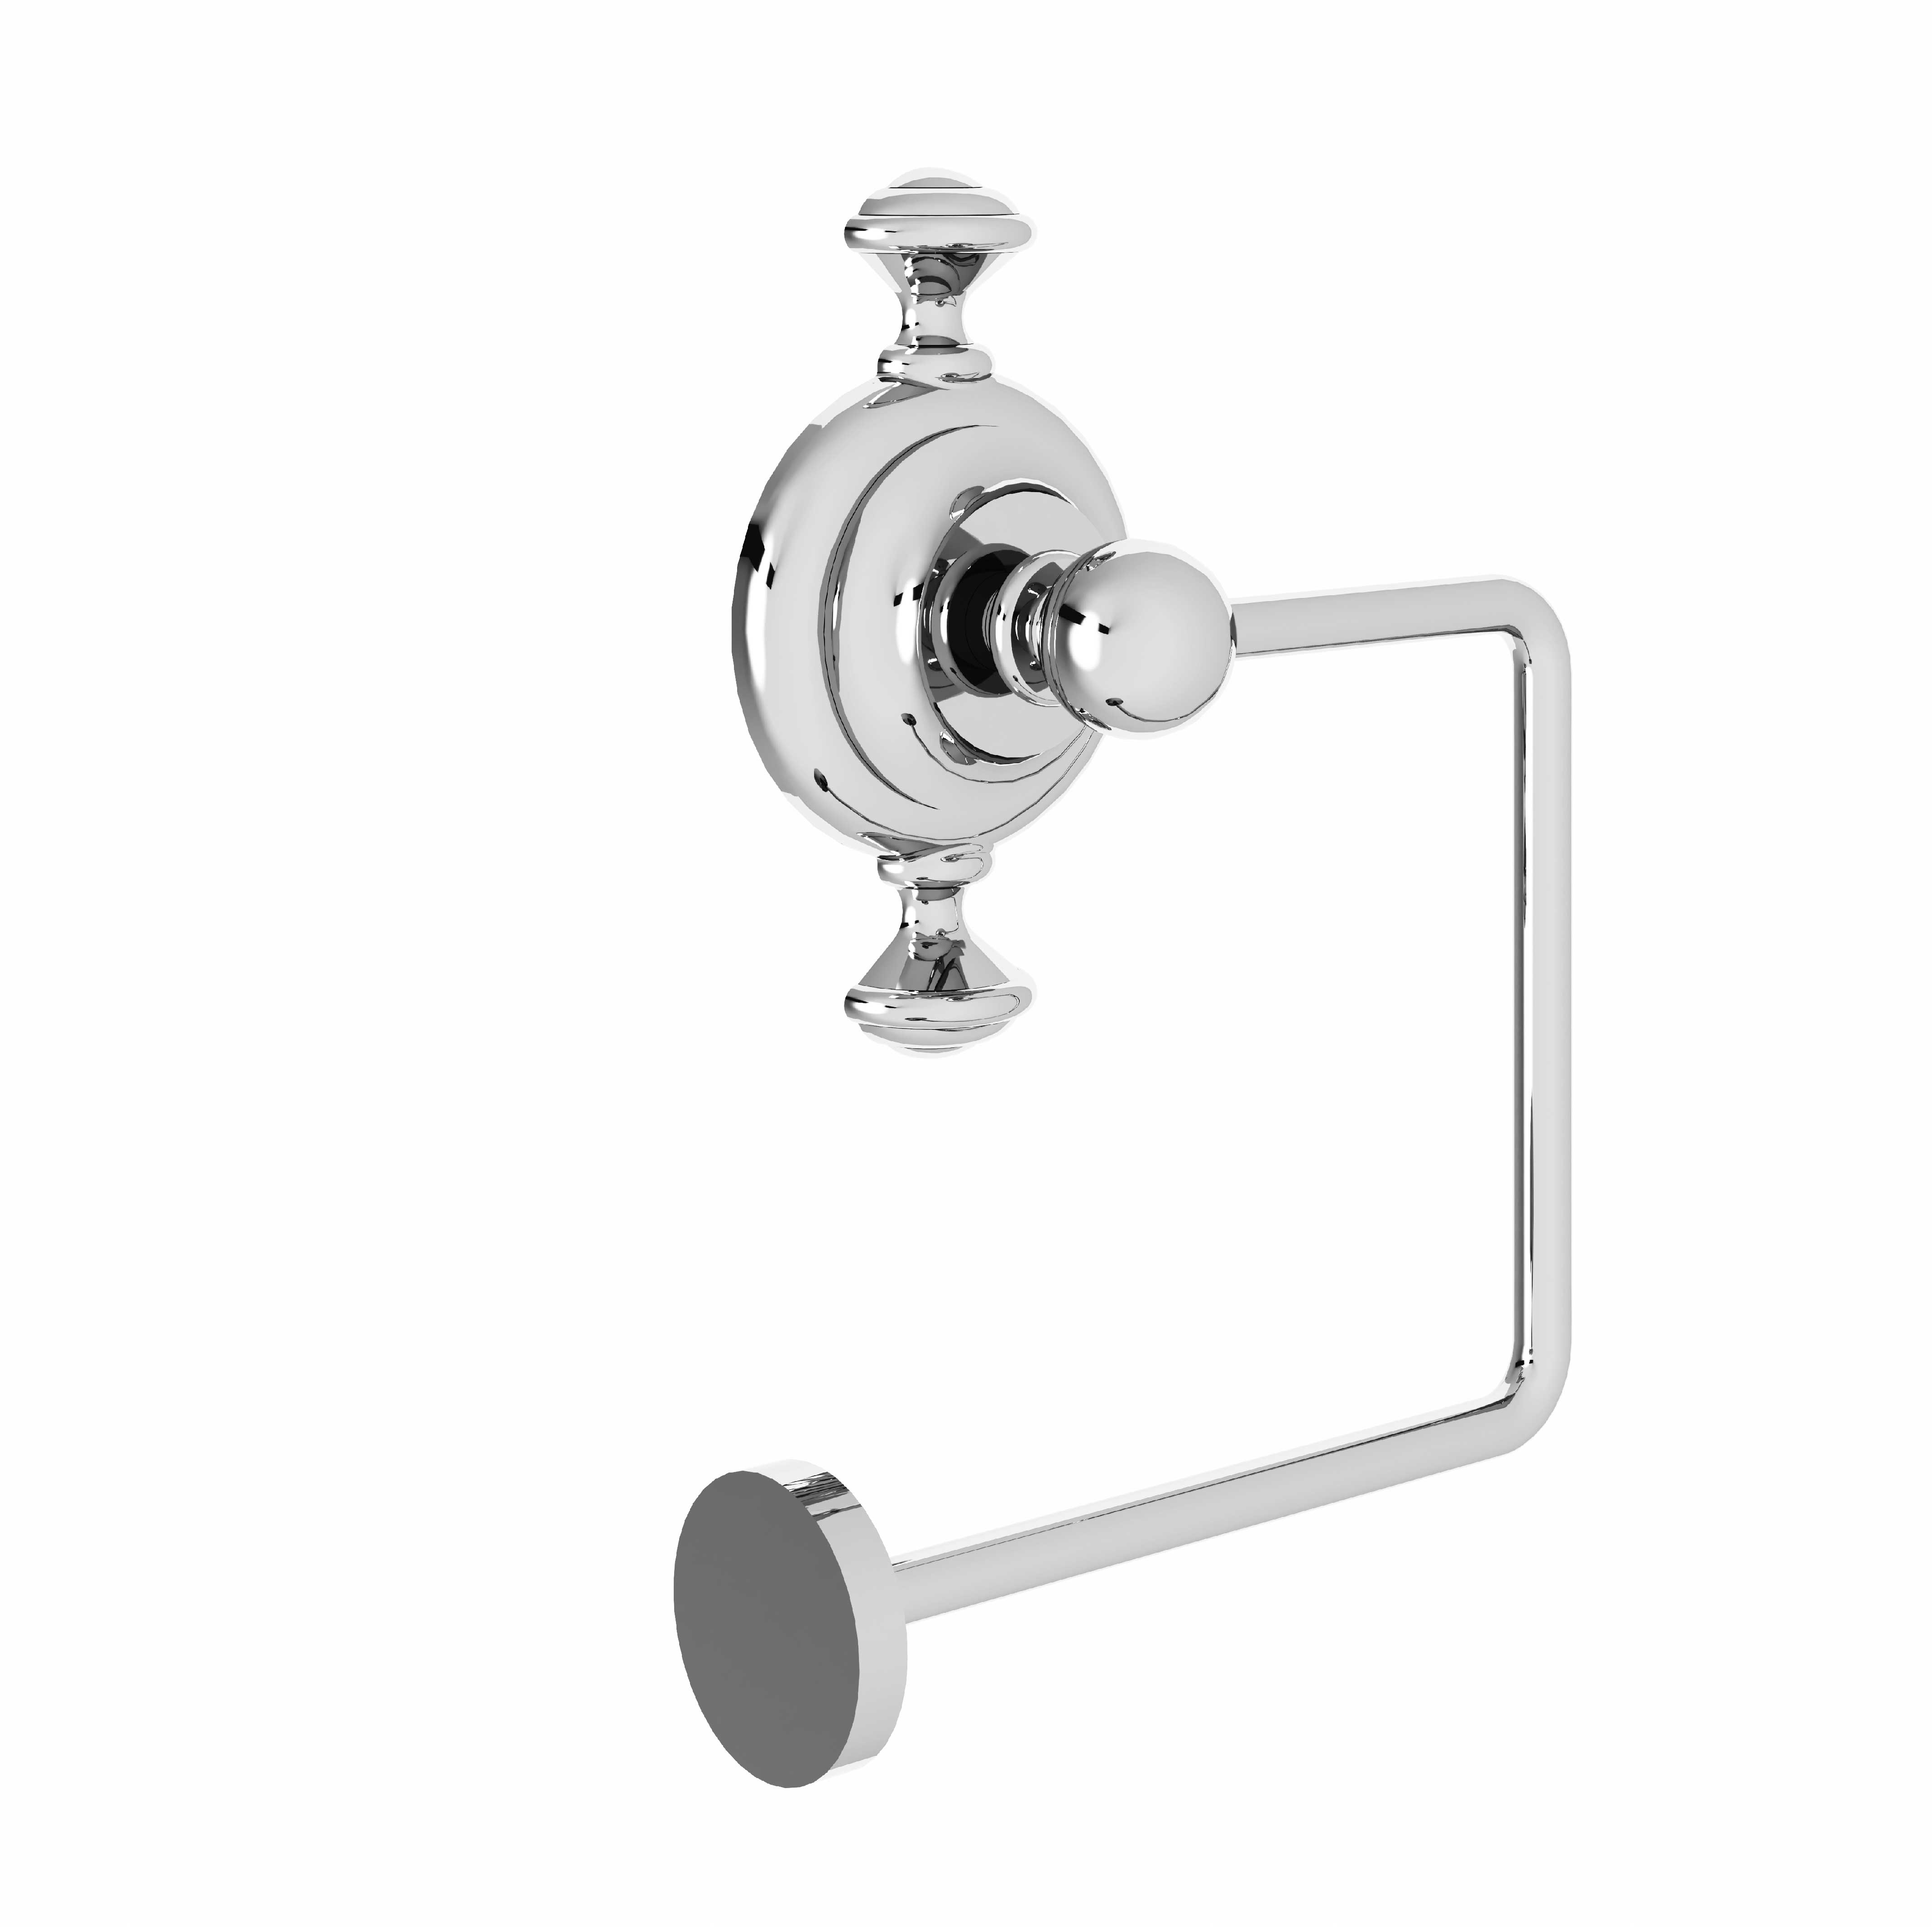 M01-504 Toilet roll holder without cover